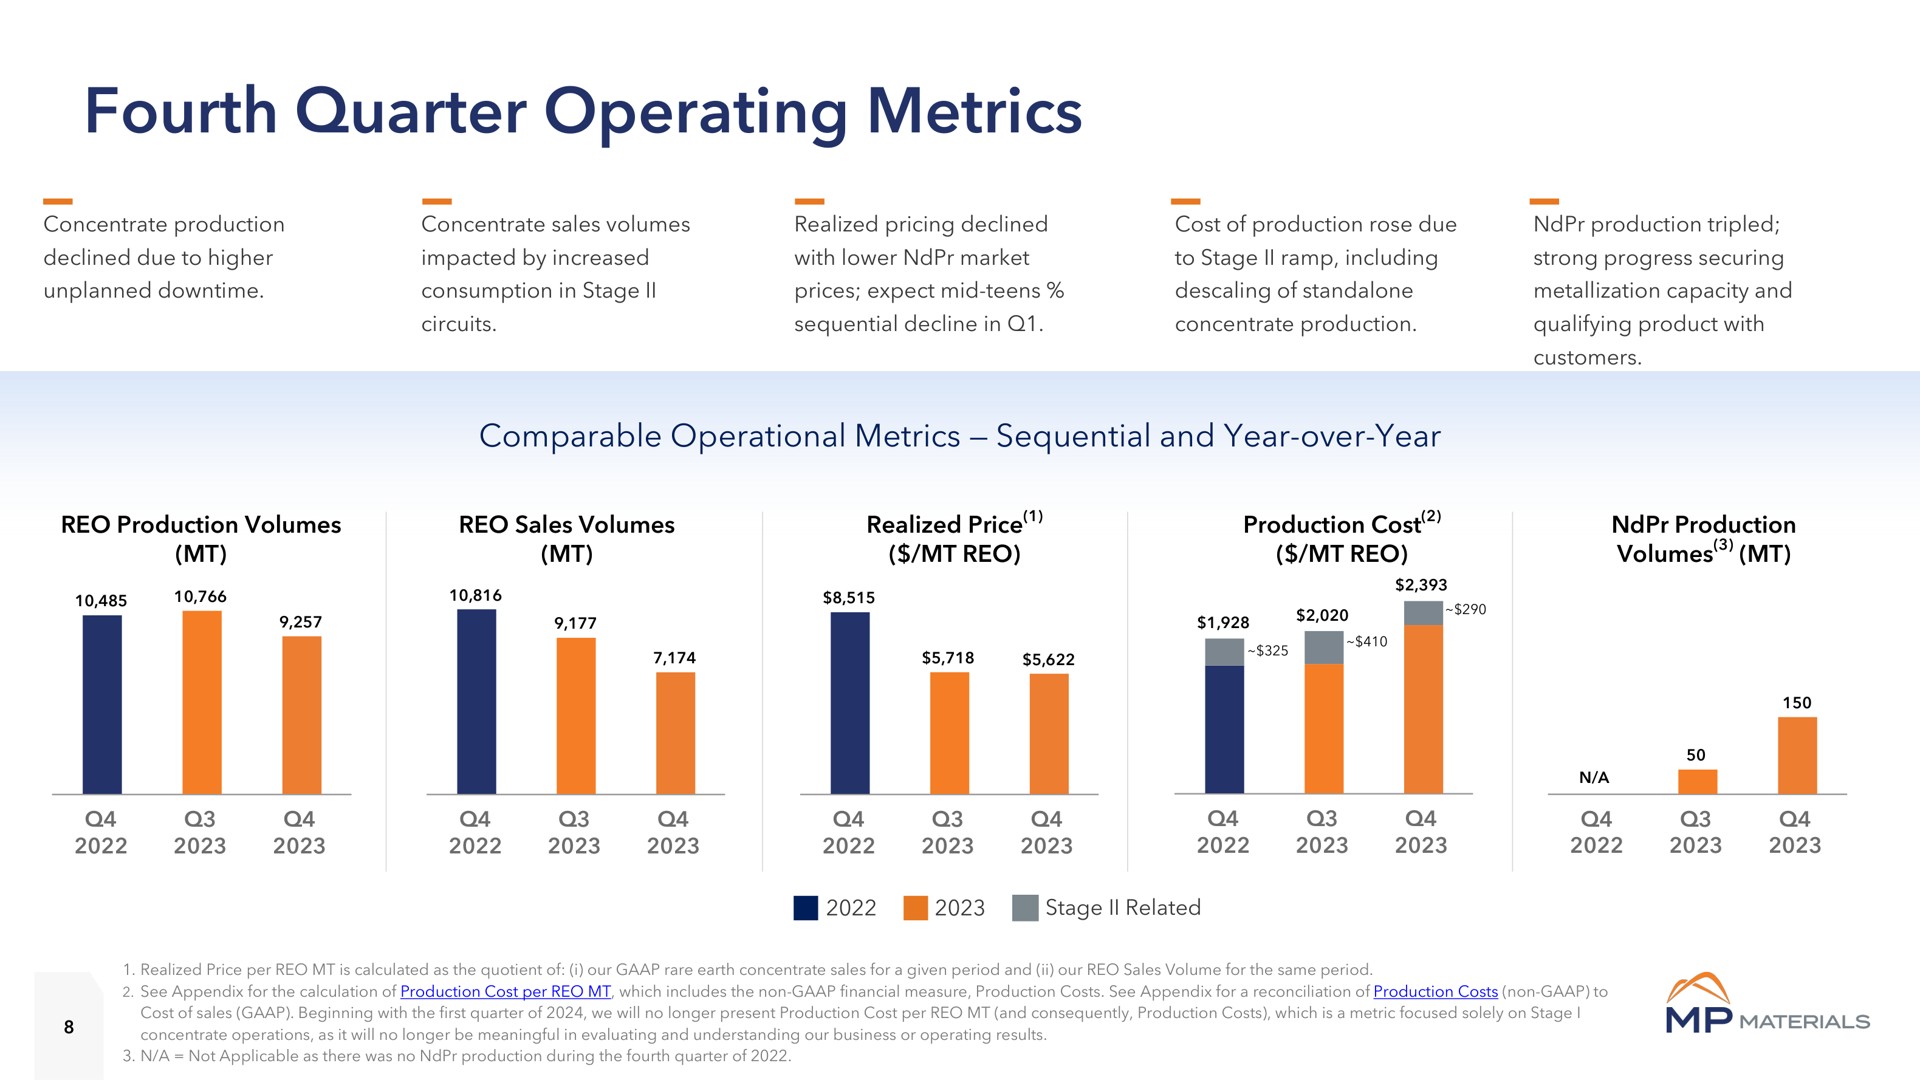 fourth quarter operating metrics comparable operational sequential and year over year | MP Materials